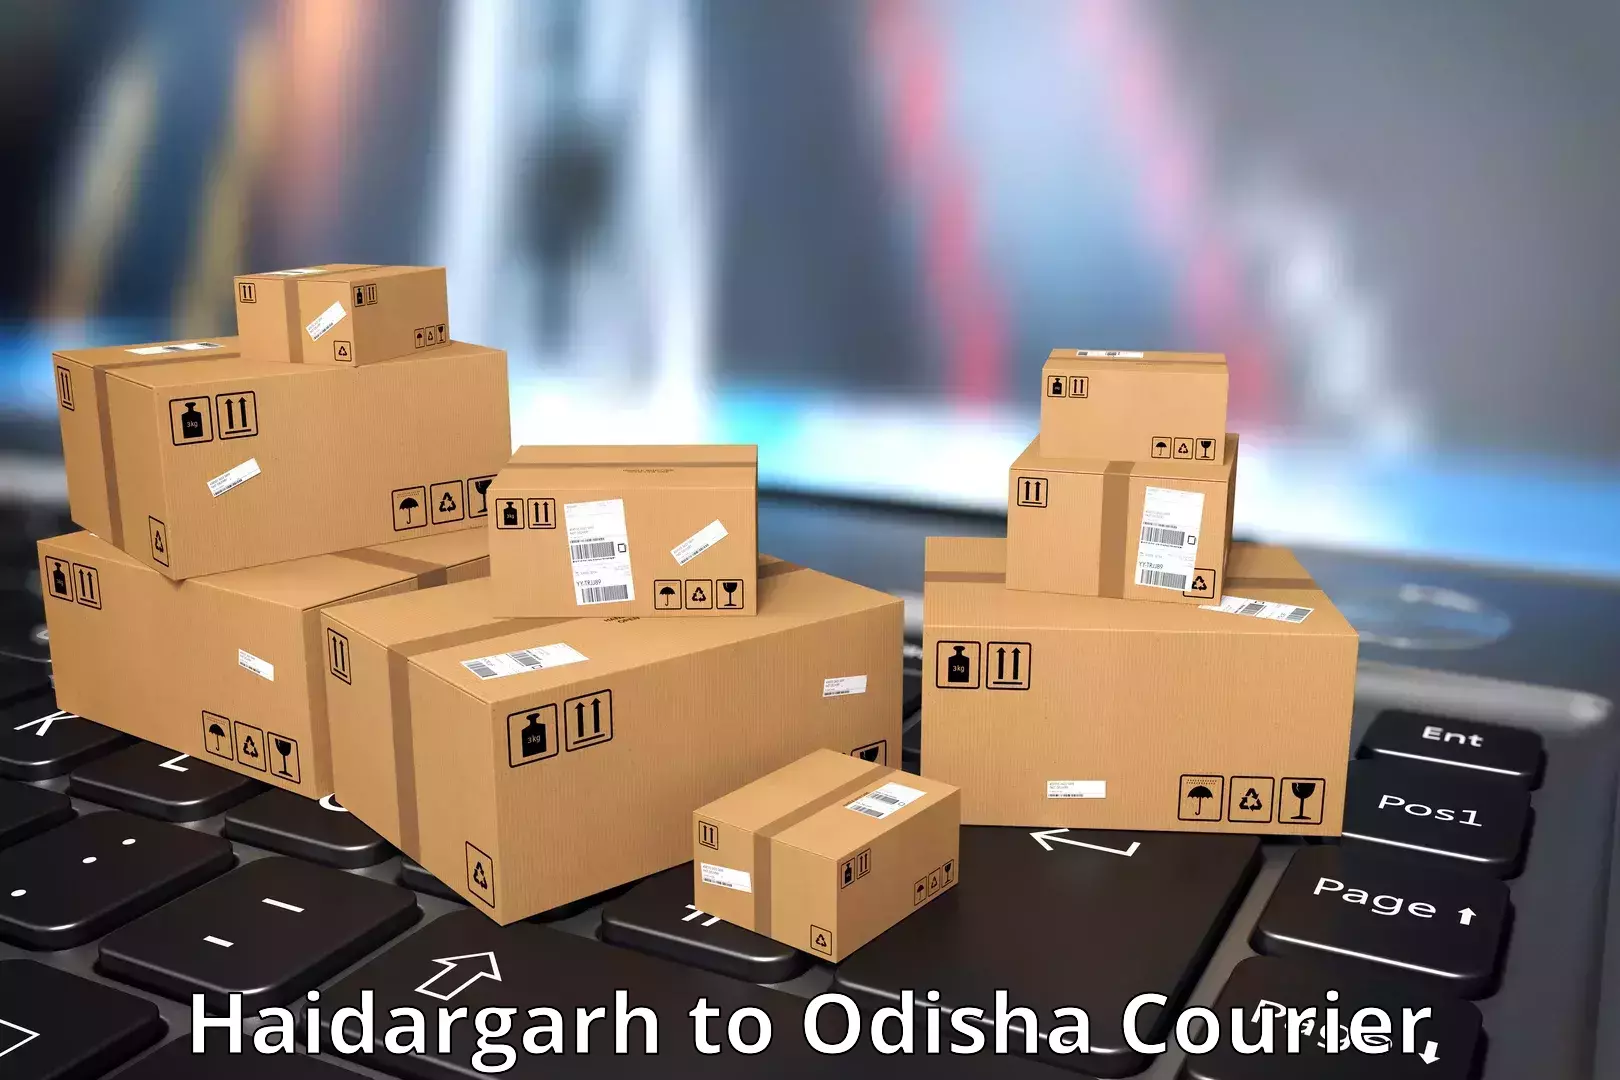 Same-day delivery solutions Haidargarh to Odisha